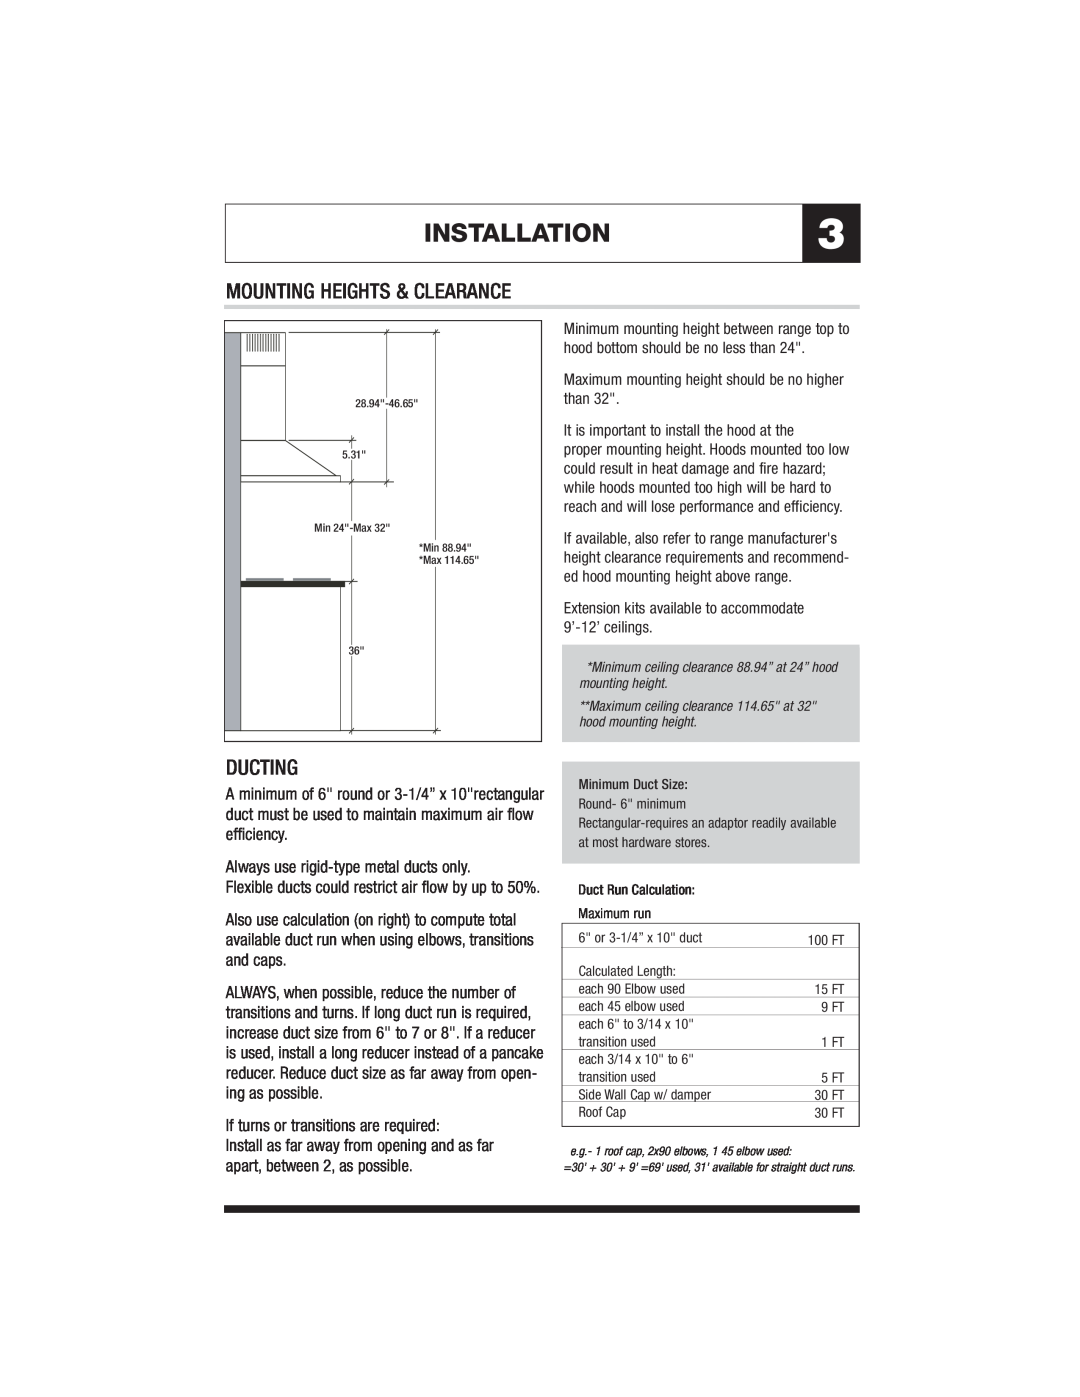 Jenn-Air JXT8042ADS specifications INSTALLATION3, Mounting Heights & Clearance, Ducting 